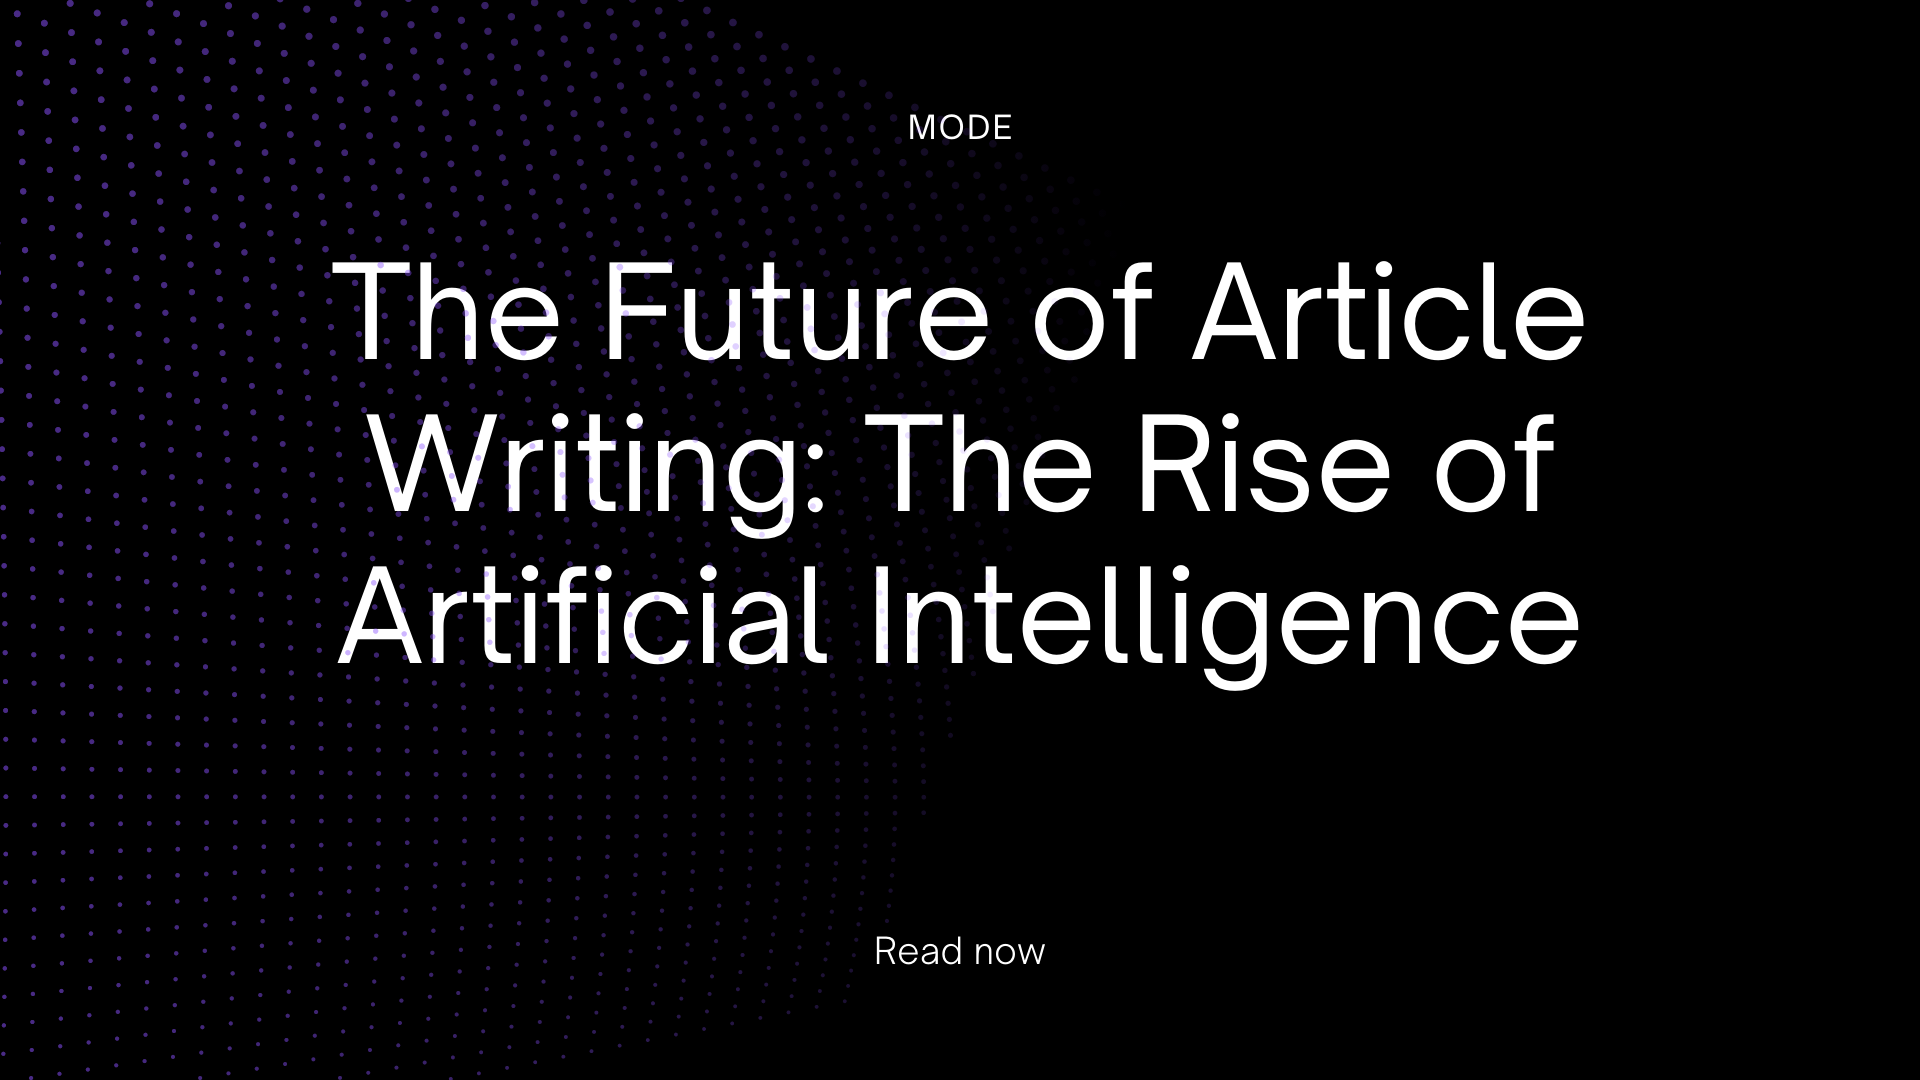 The Future of Article Writing: The Rise of Artificial Intelligence